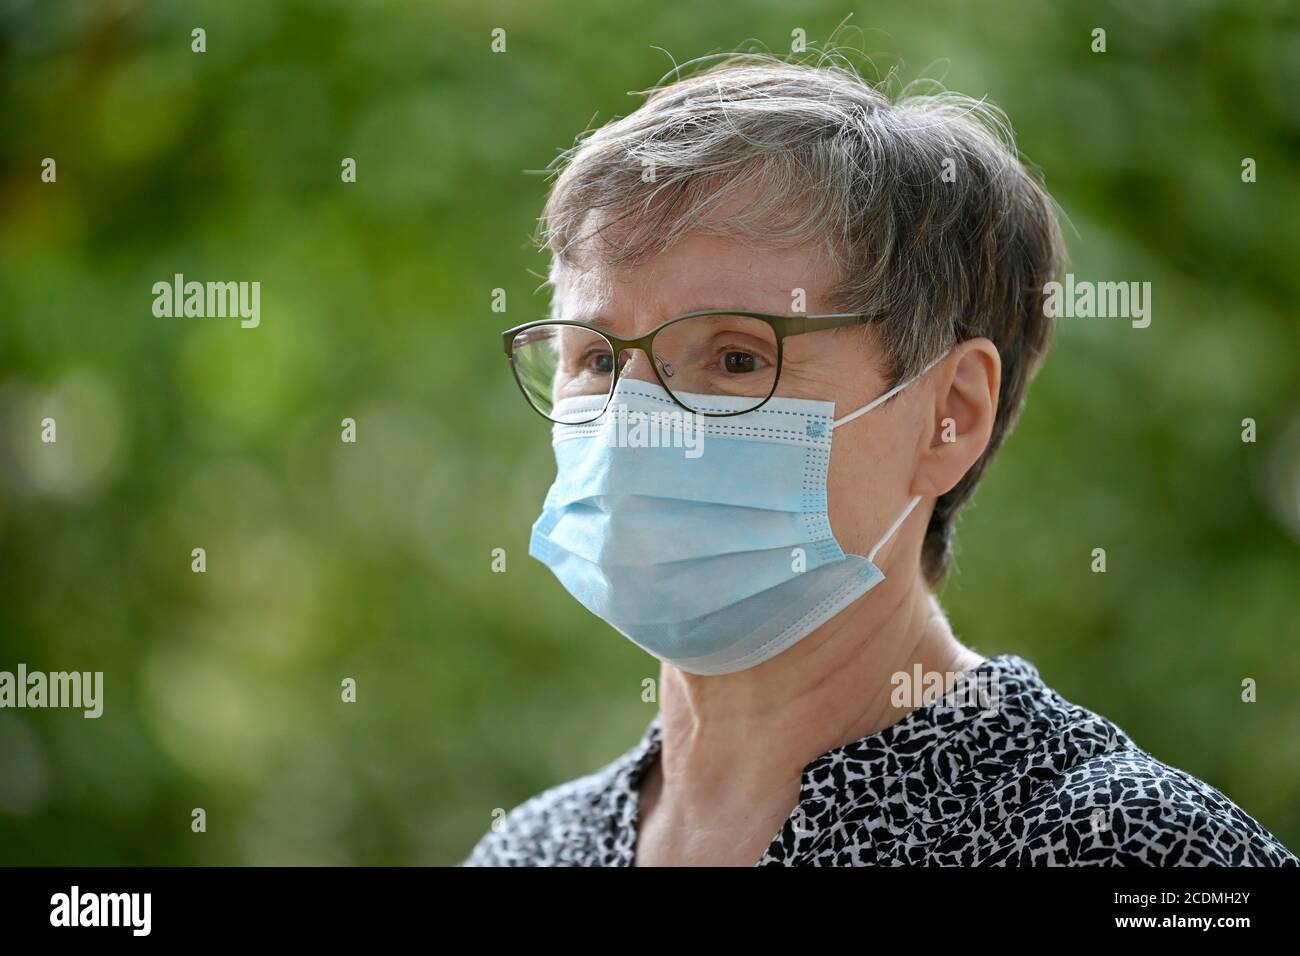 Elderly woman wears mouth mask correctly over nose and mouth, portrait, corona crisis, Germany Stock Photo